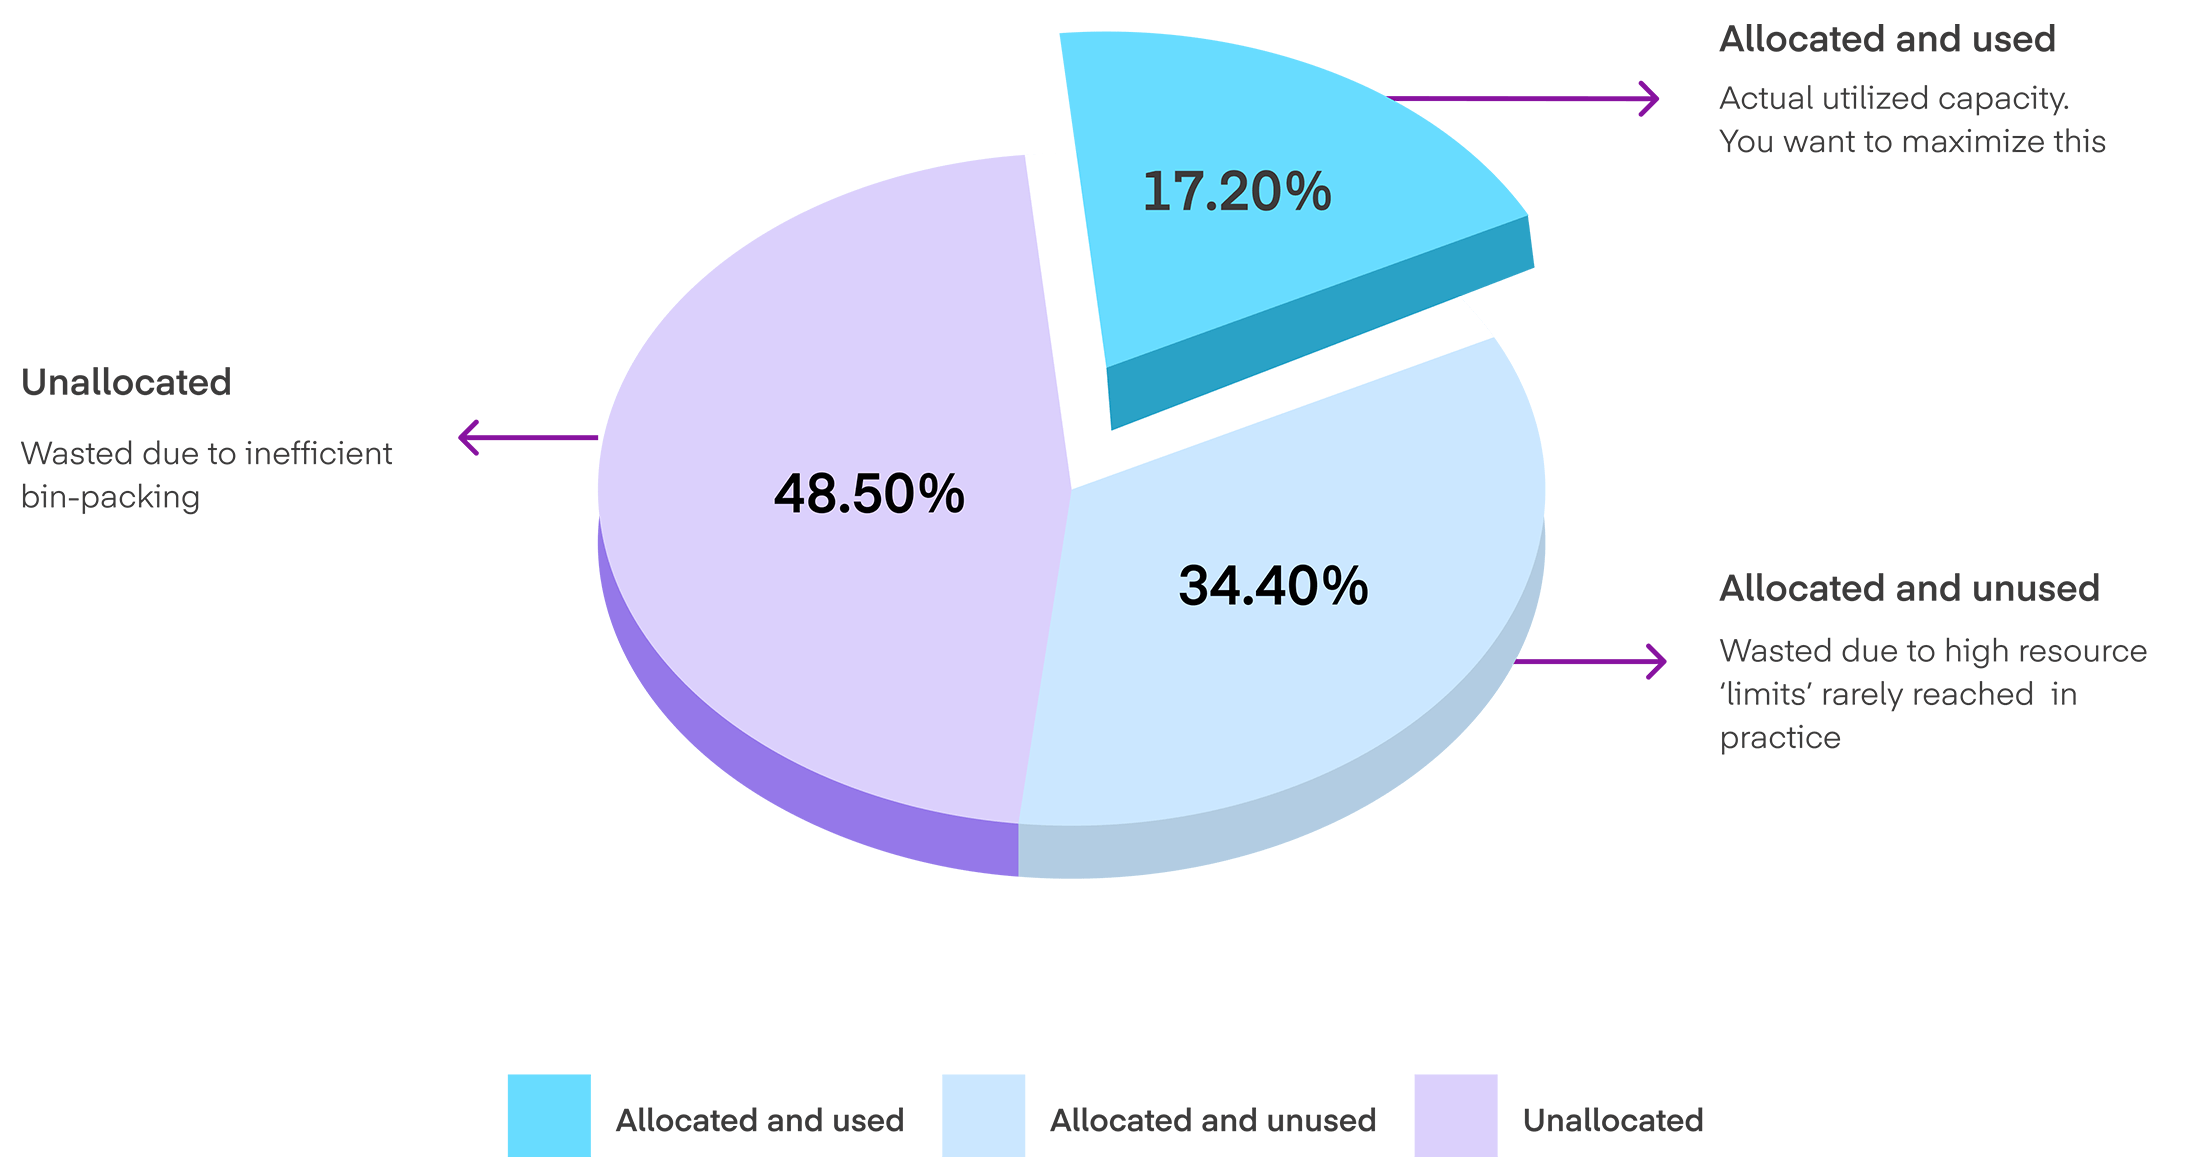 Pie chart showing: 48.5% Wasted due to inefficient bin-packing; 34.4% Wasted due to high resource ‘limits’ rarely reached  in practice; 17.2% Actual utilized capacity - you want to maximize this<br />
